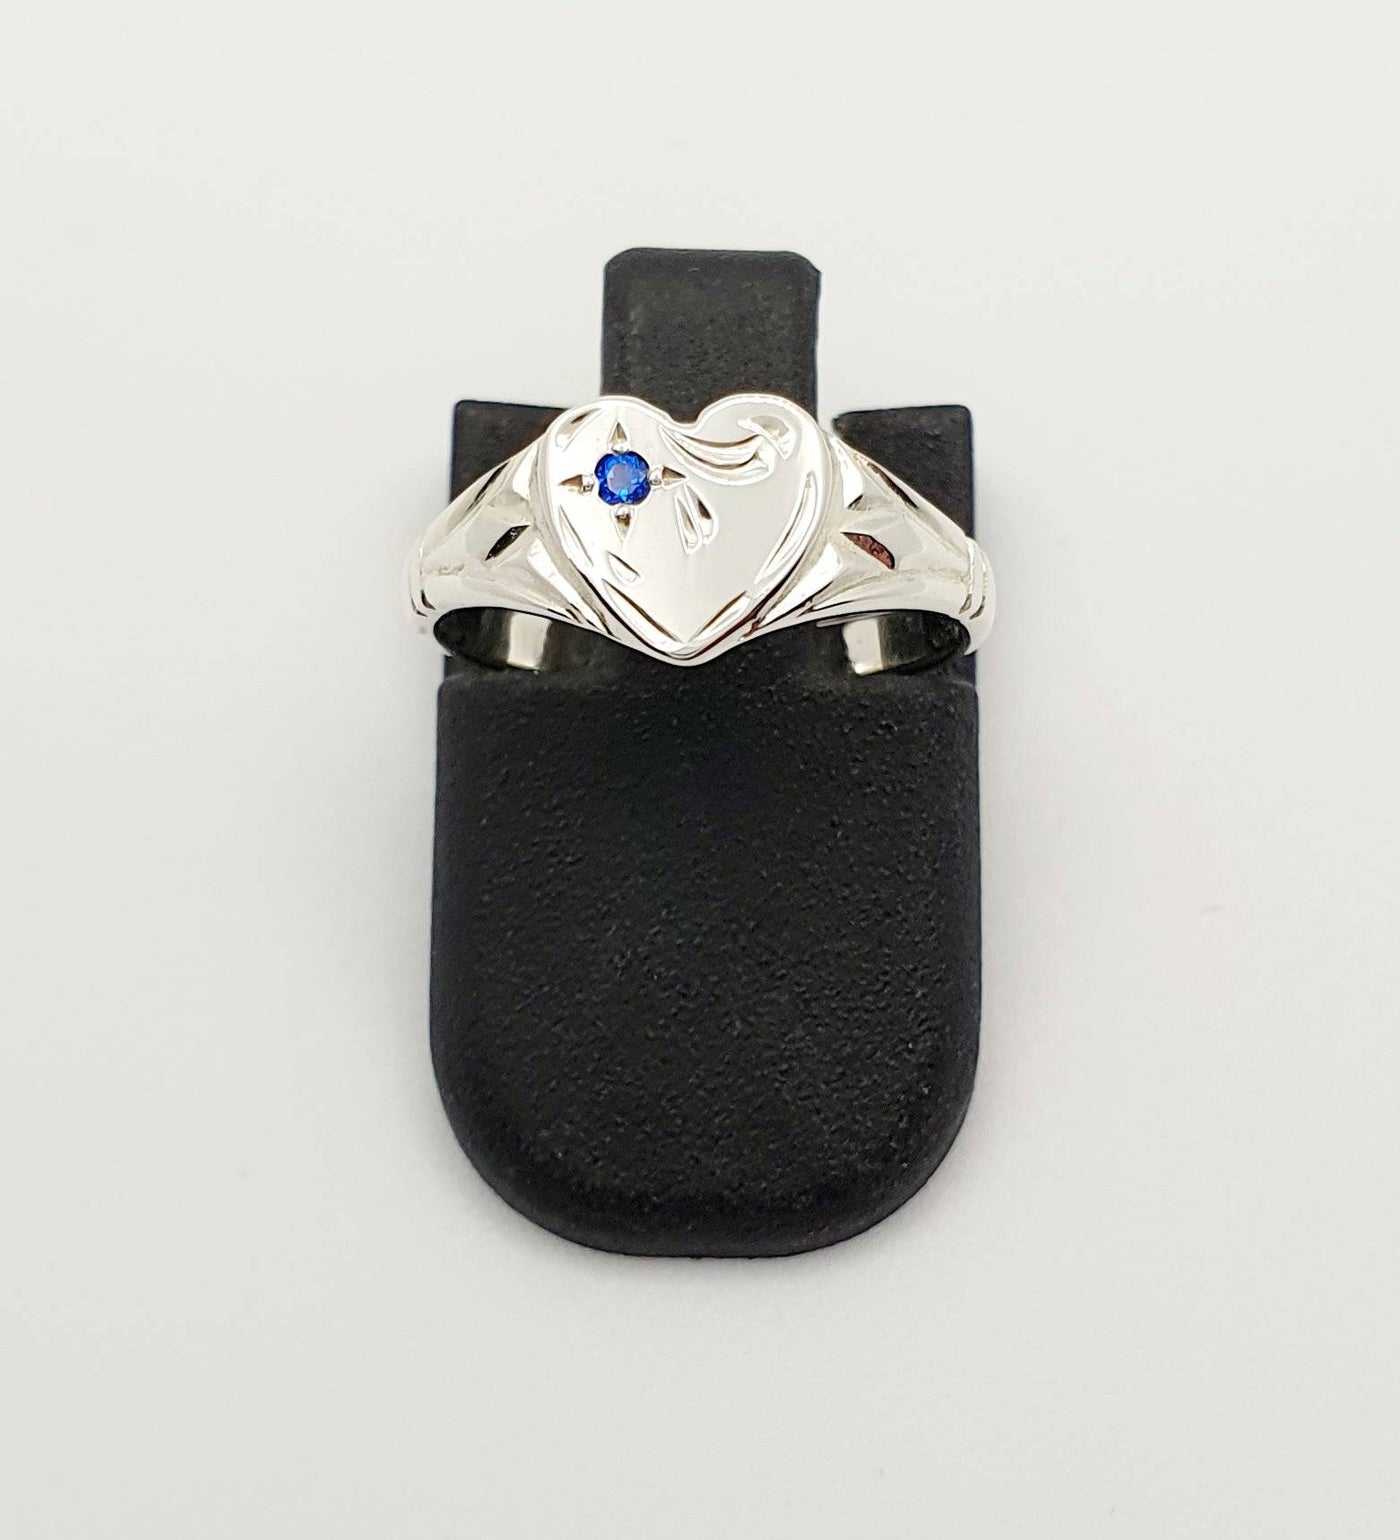 S/S Heart Signet Ring with Blue Stone. Size F